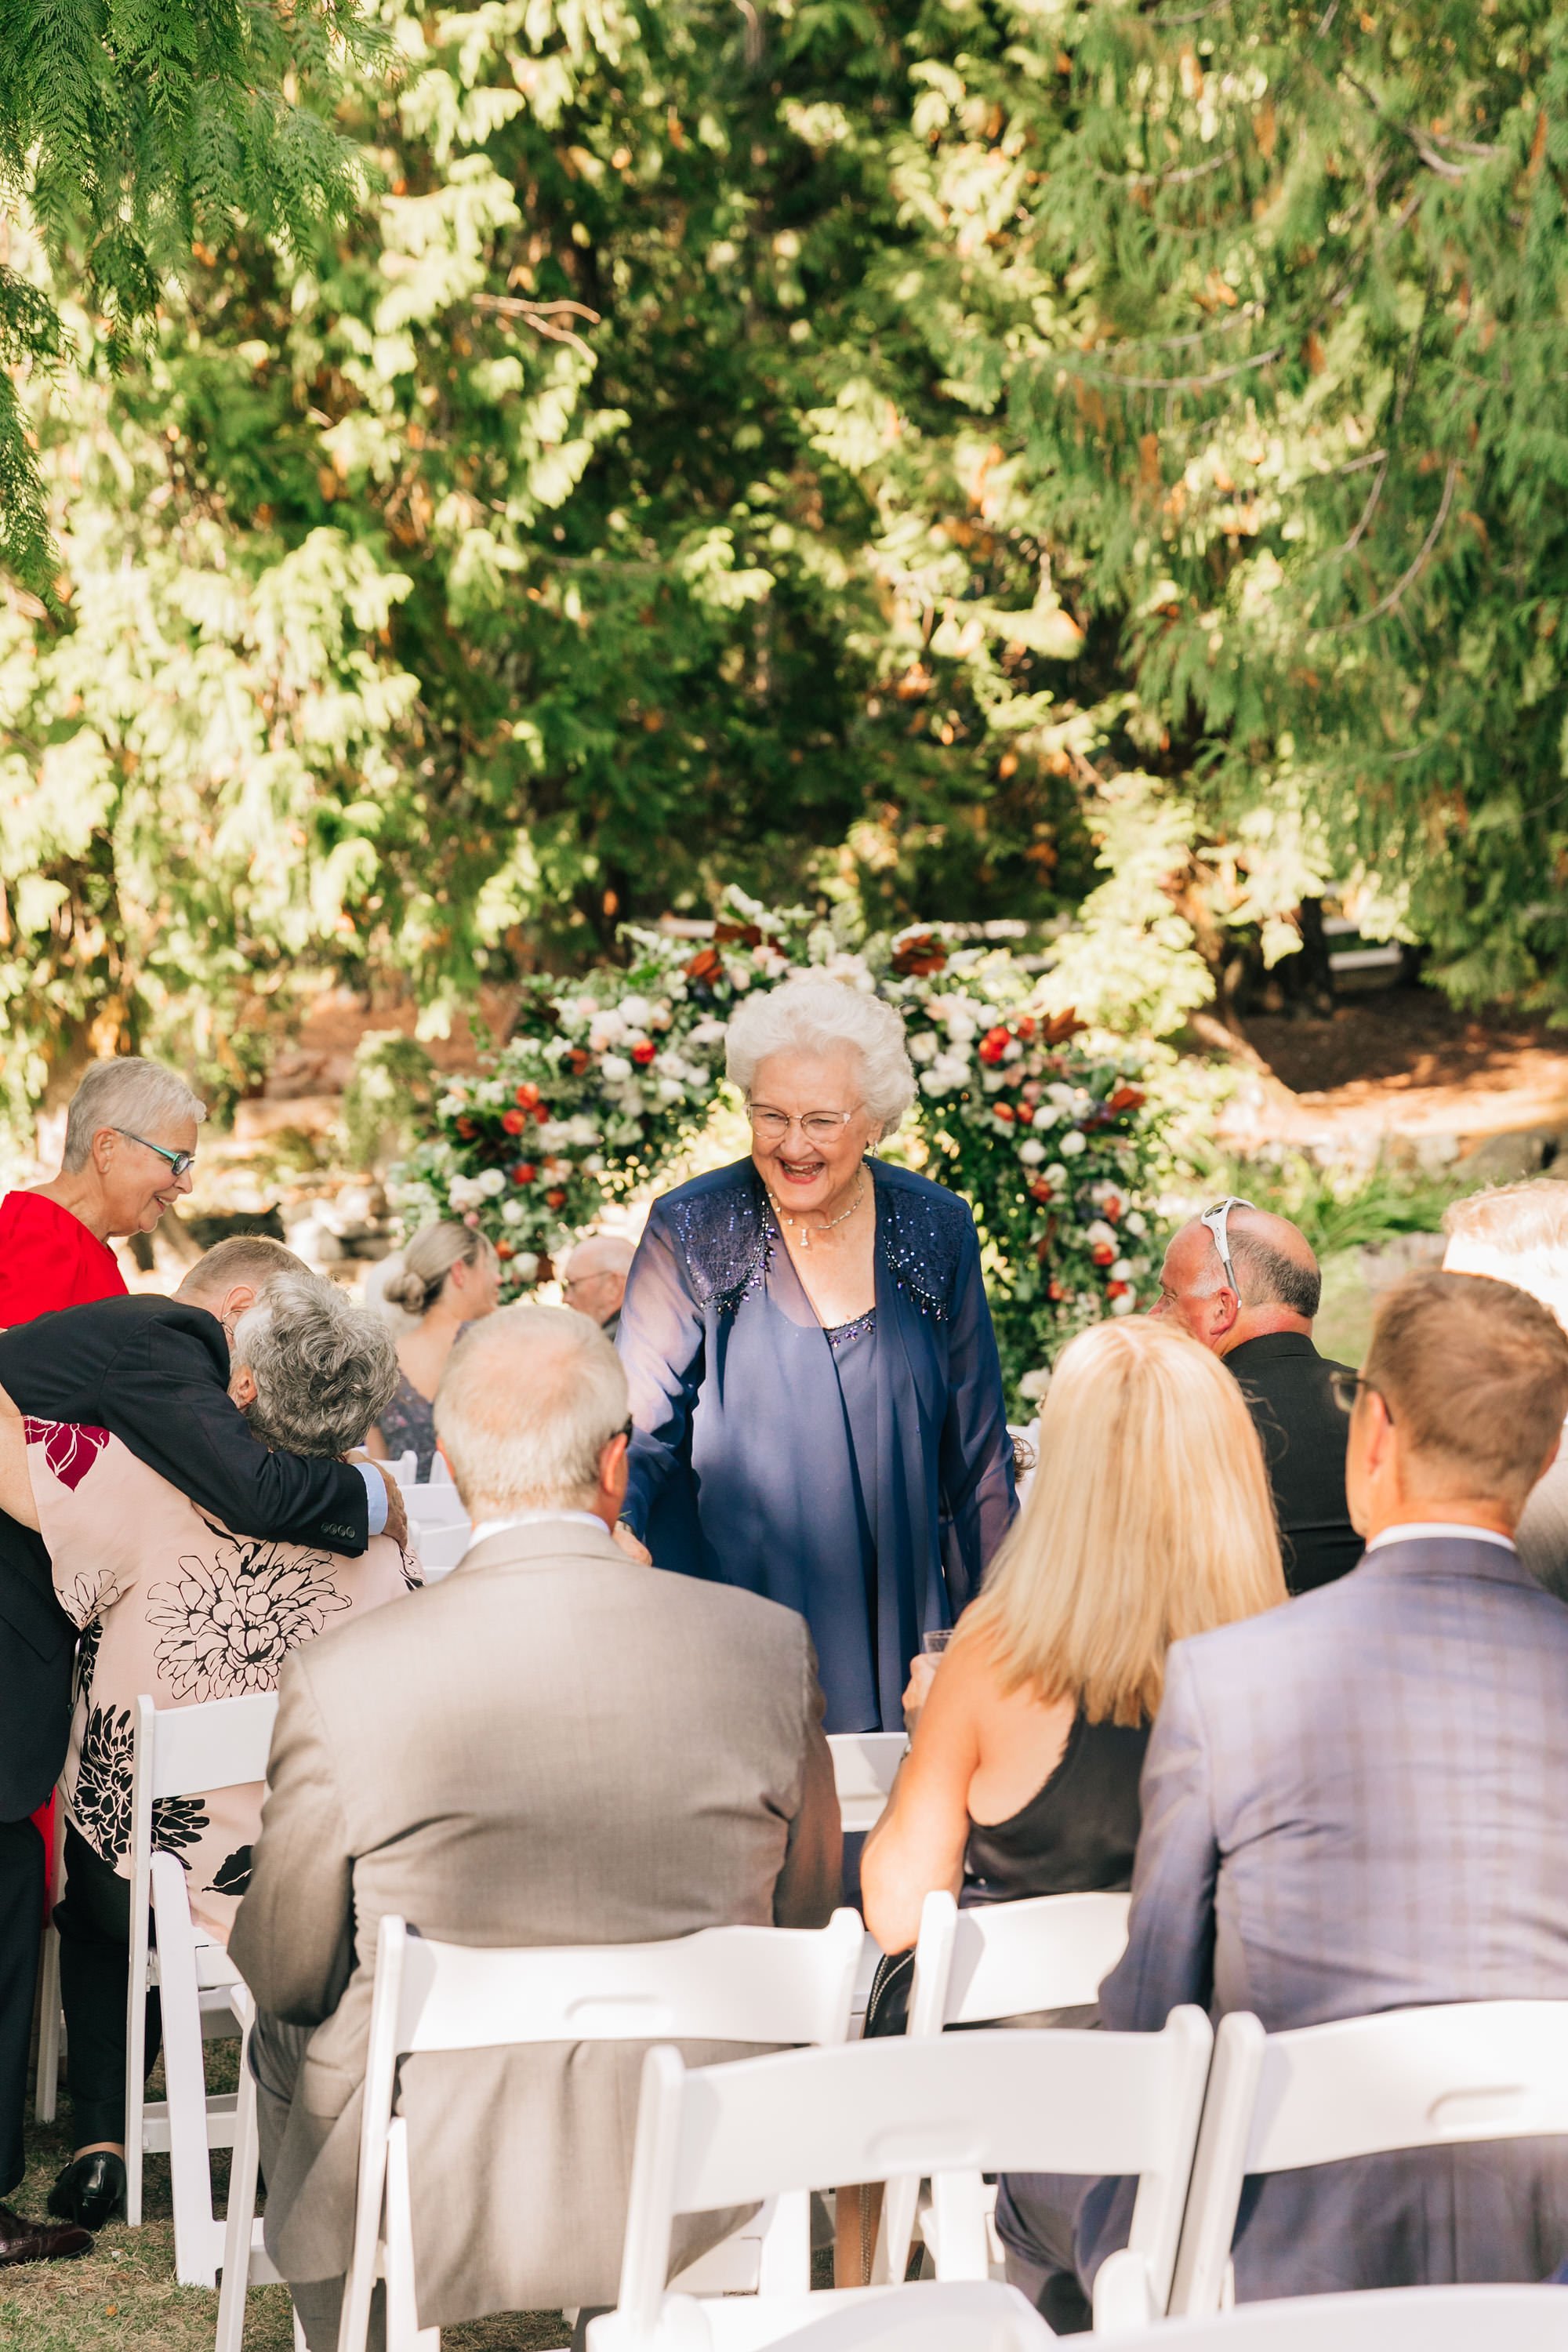 woodinville-winery-wedding-venue-chateau-lill-ceremony-lawn-photos